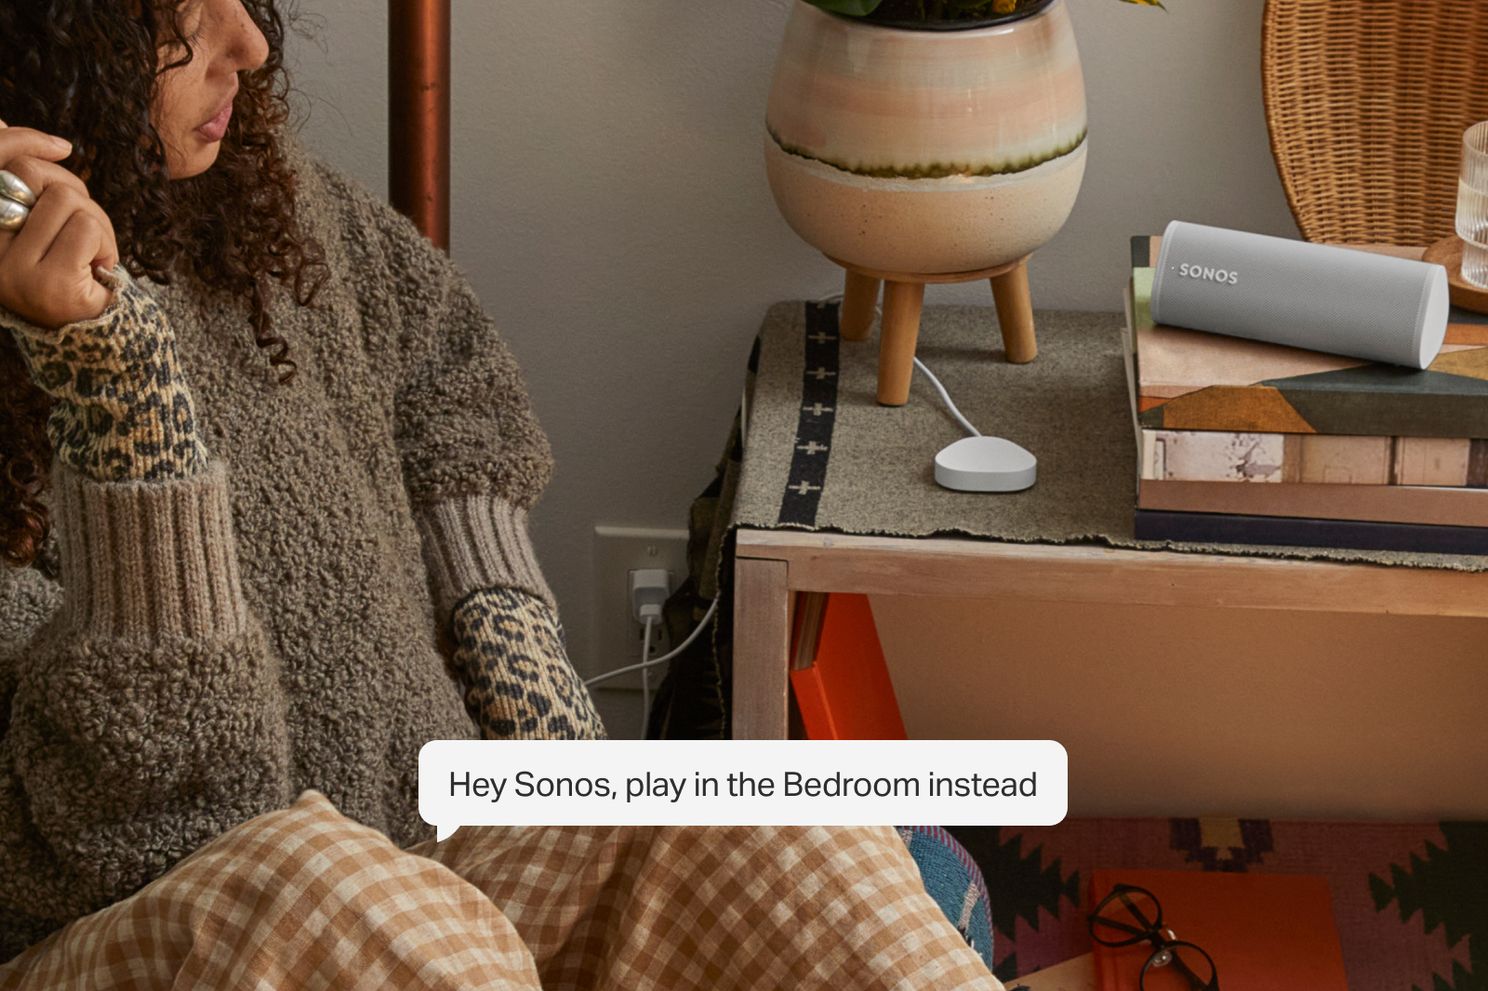 Sonos Voice Control Official: This is the Google Assistant alternative from Sonos